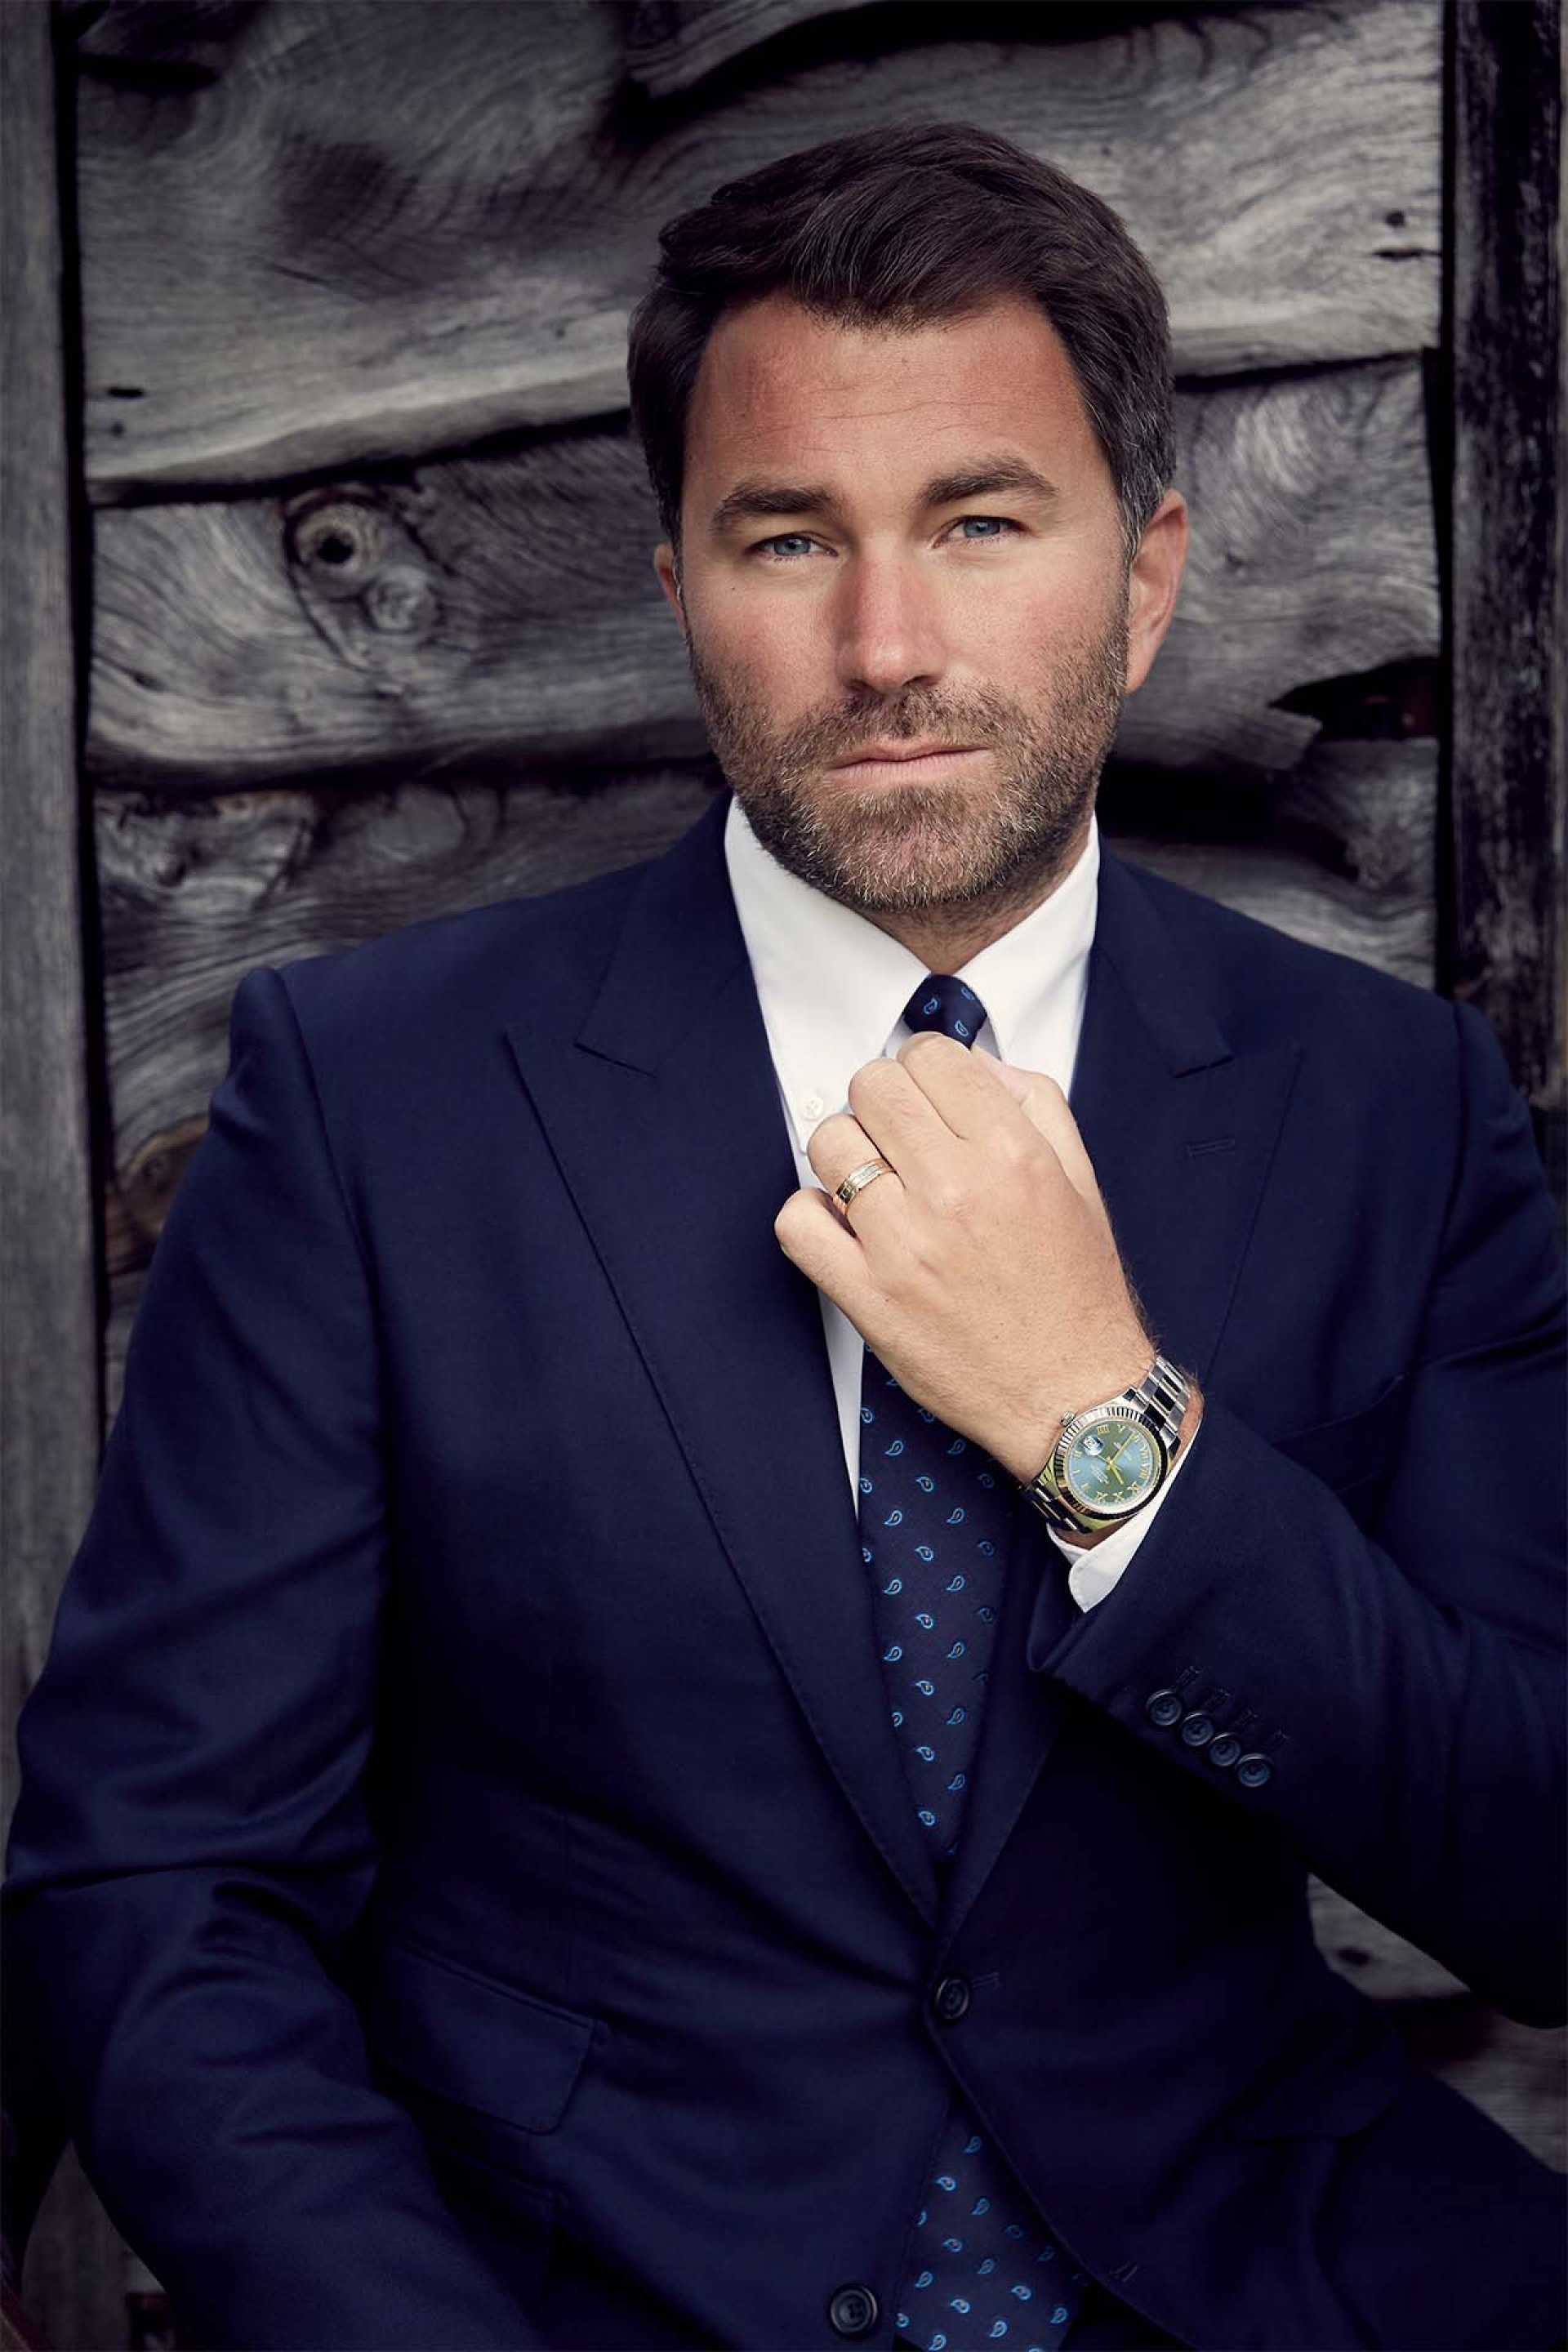 Who is Eddie Hearn? Inside His Remarkable Story | Square Mile